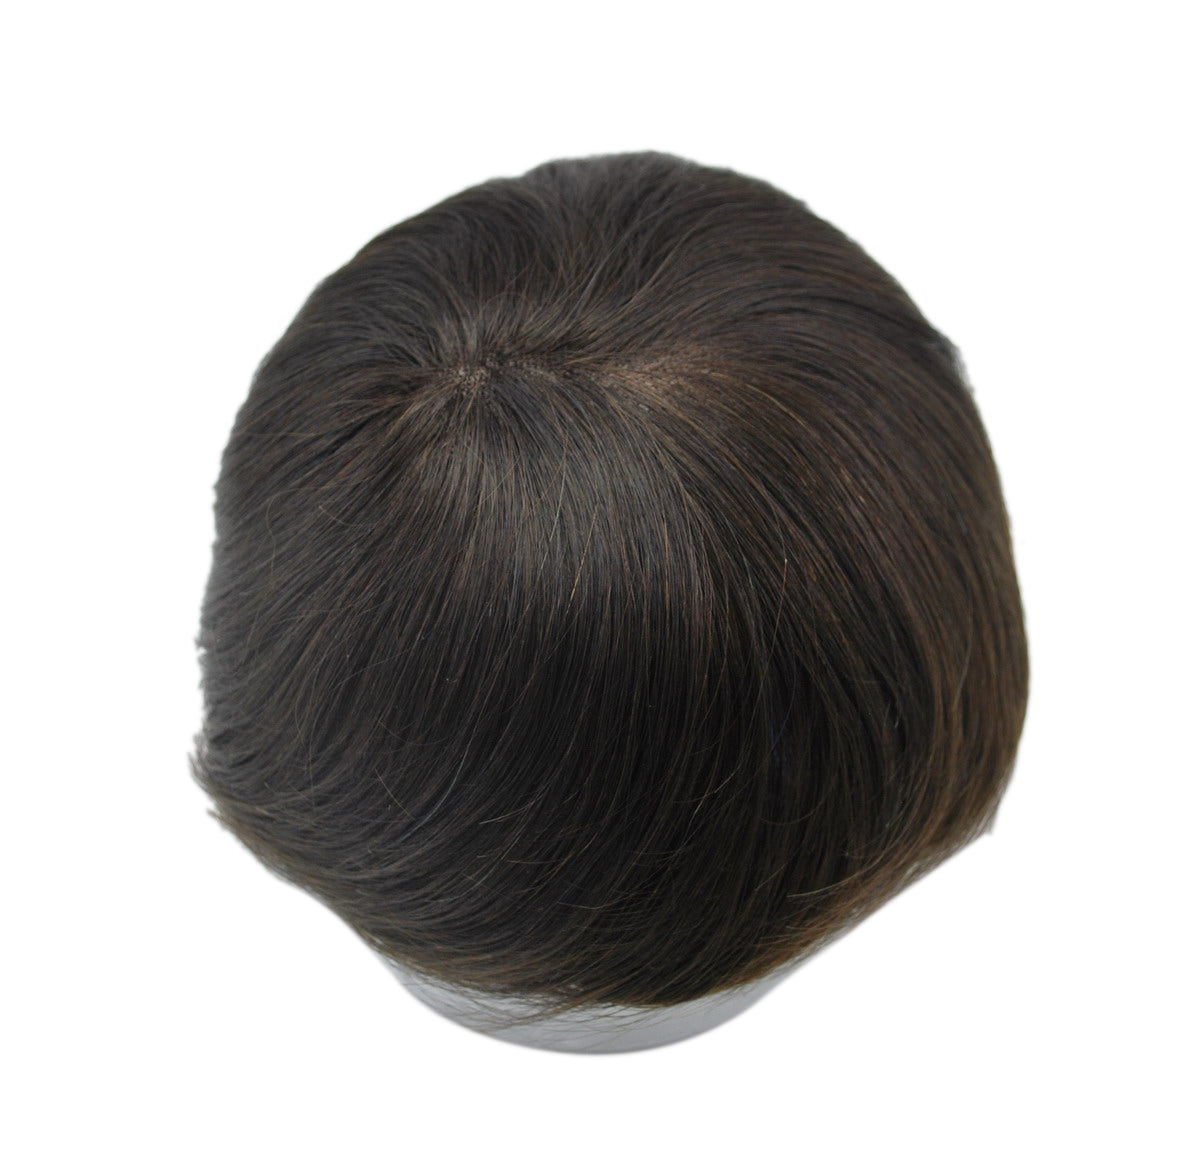 dark brown hairpiece toupee for men French lace with PU back and sides hair system